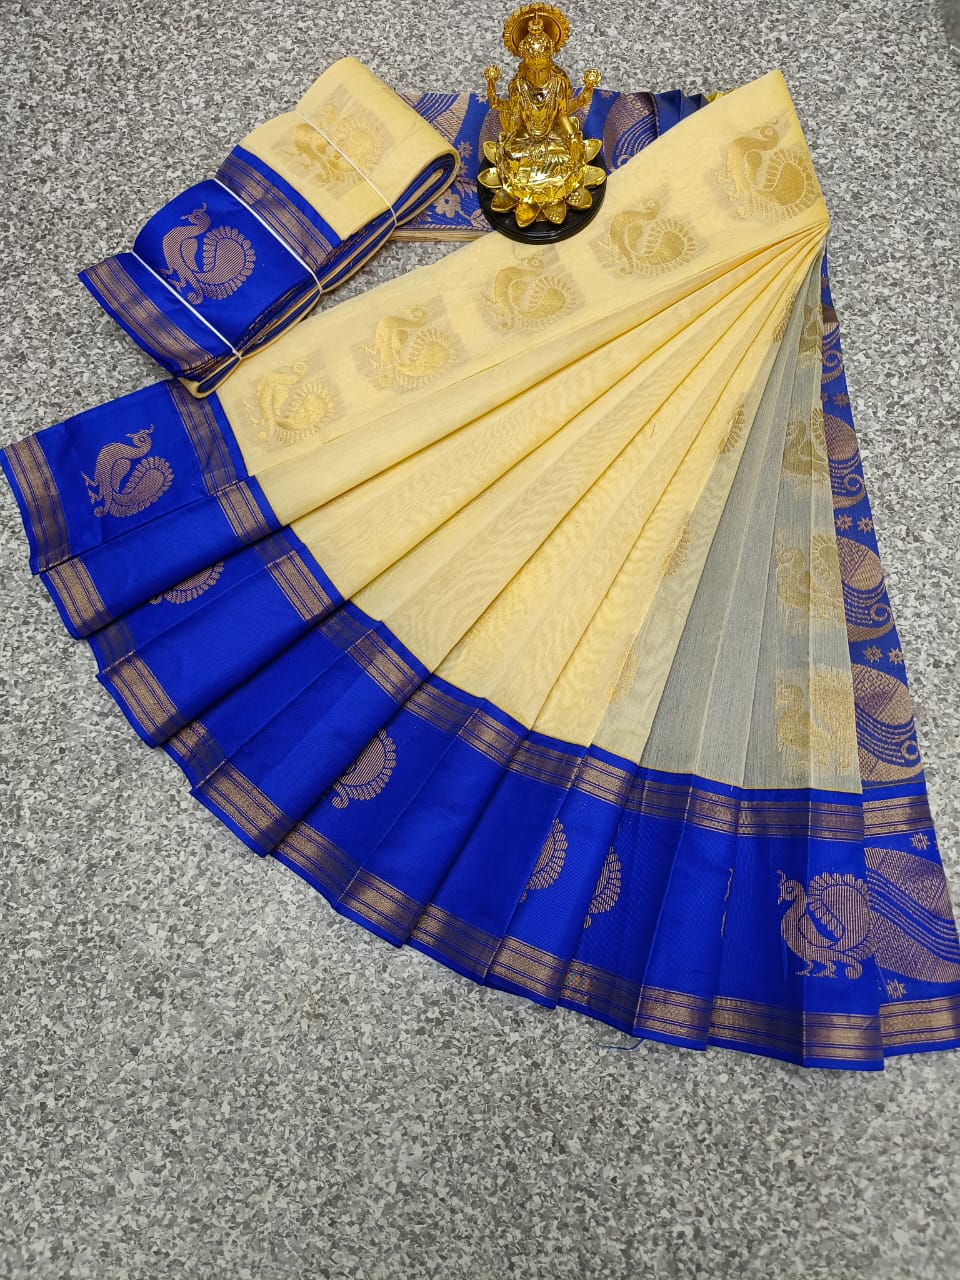 Cotton Sarees (कॉटन साड़ी) - Upto 50% to 80% OFF on Pure Cotton Sarees  Online at Best Prices In India | Flipkart.com